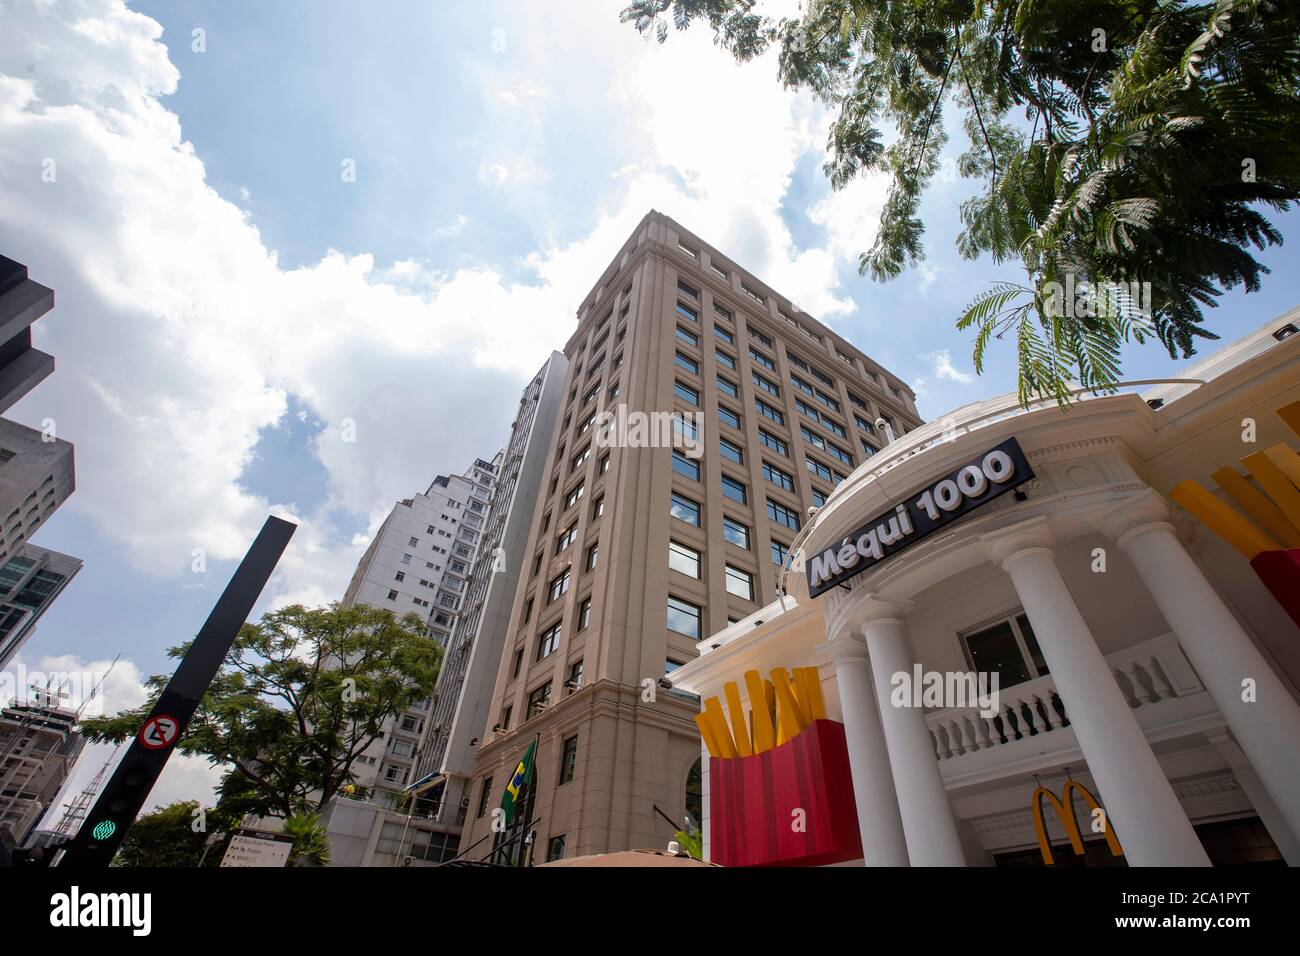 Sao Paulo, Brazil -  december 29 2019 - The logo used  on facade of Mc Donald s store in celebration of the 1000th McDonald's store in Brazil Stock Photo